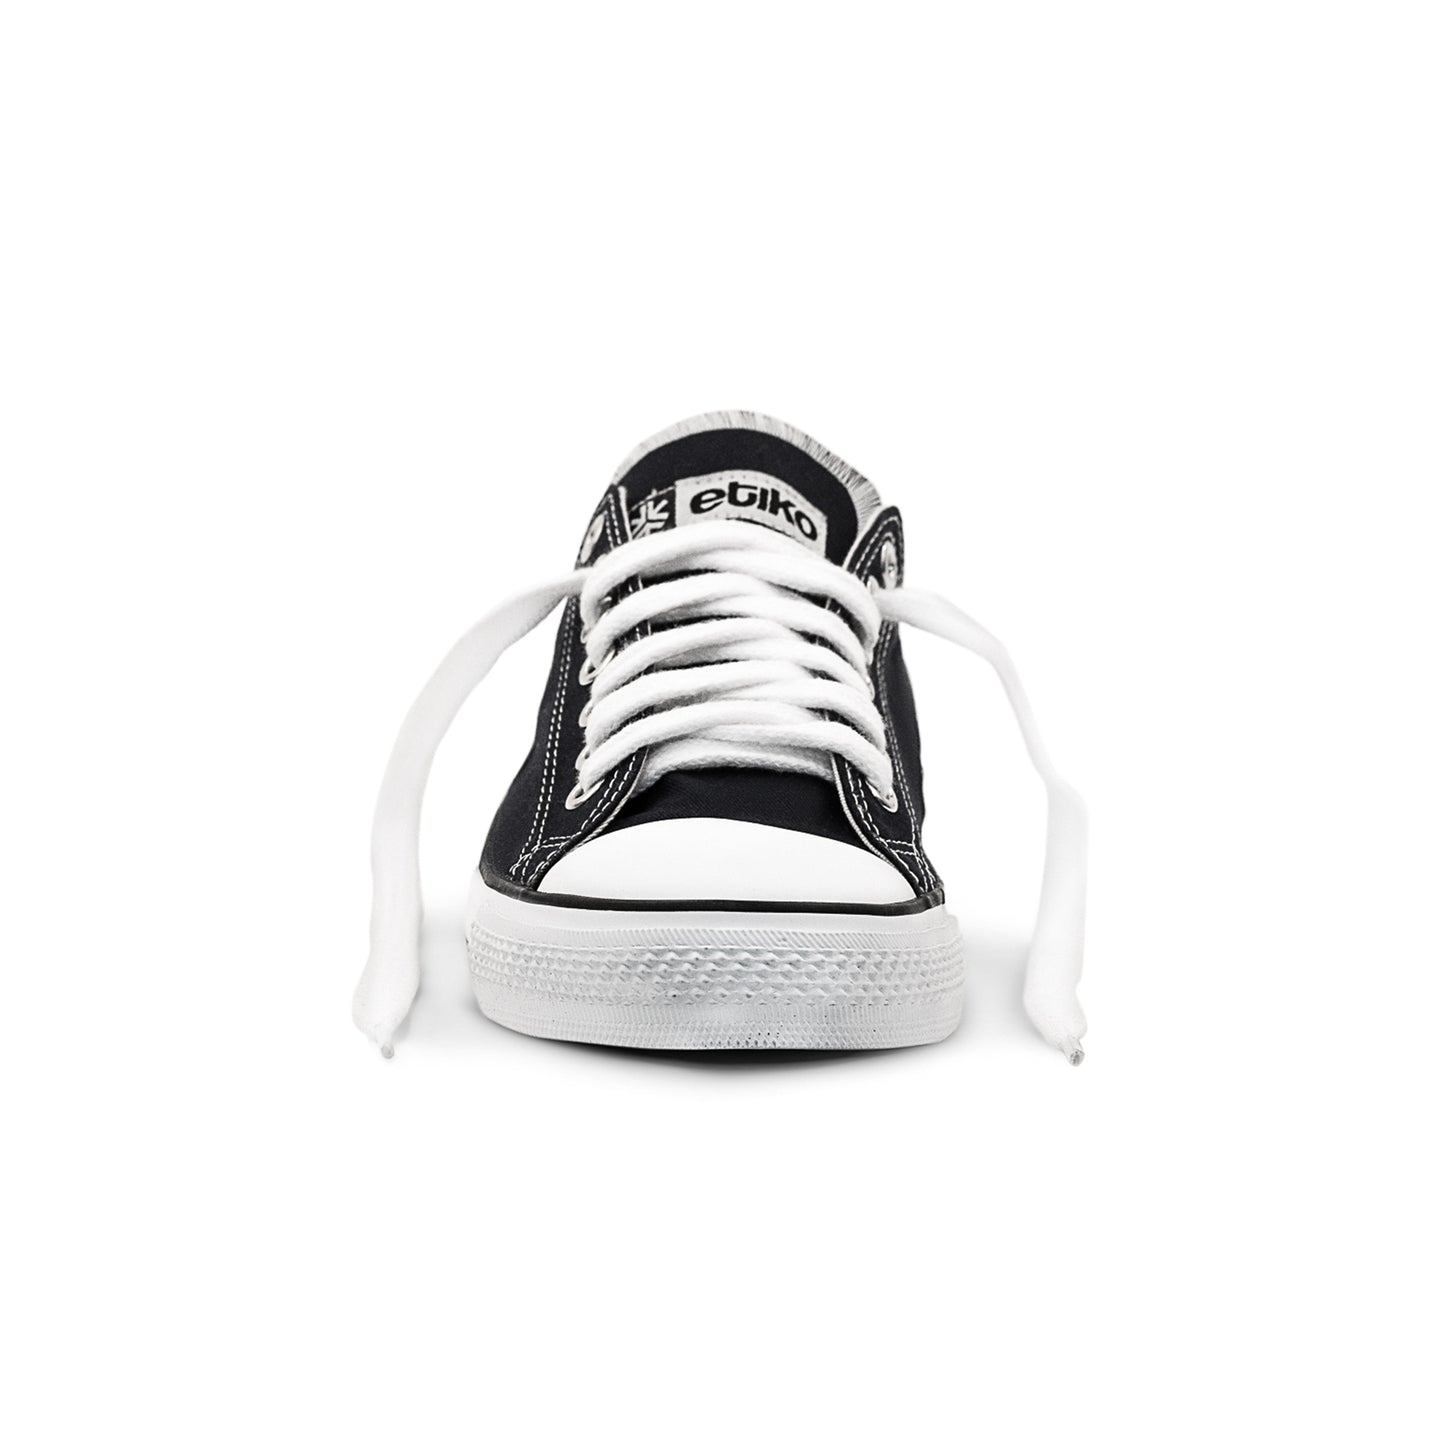 Etiko Vegan Low Cut Black and White Sneakers Organic and Fairtrade Certified Ethical Sneakers